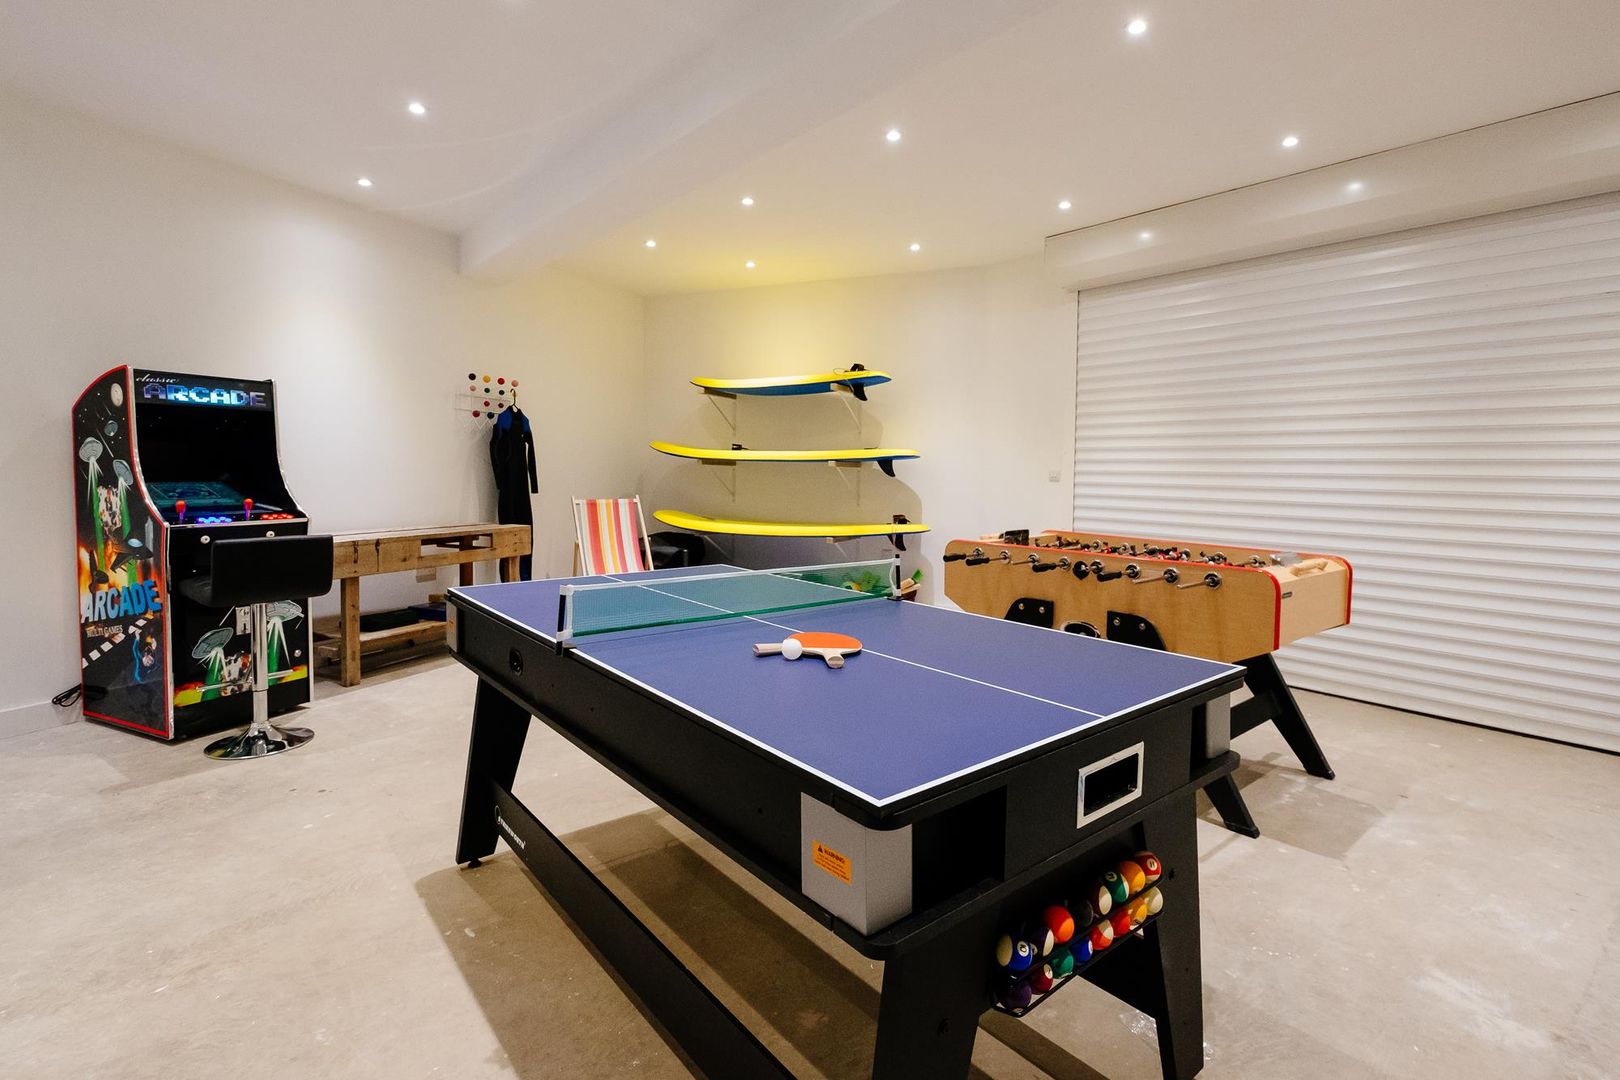 Treasure House, Polzeath | Cornwall, Perfect Stays Perfect Stays Stanza dei bambini moderna Games room,table tennis,children,table football,holiday home,garage